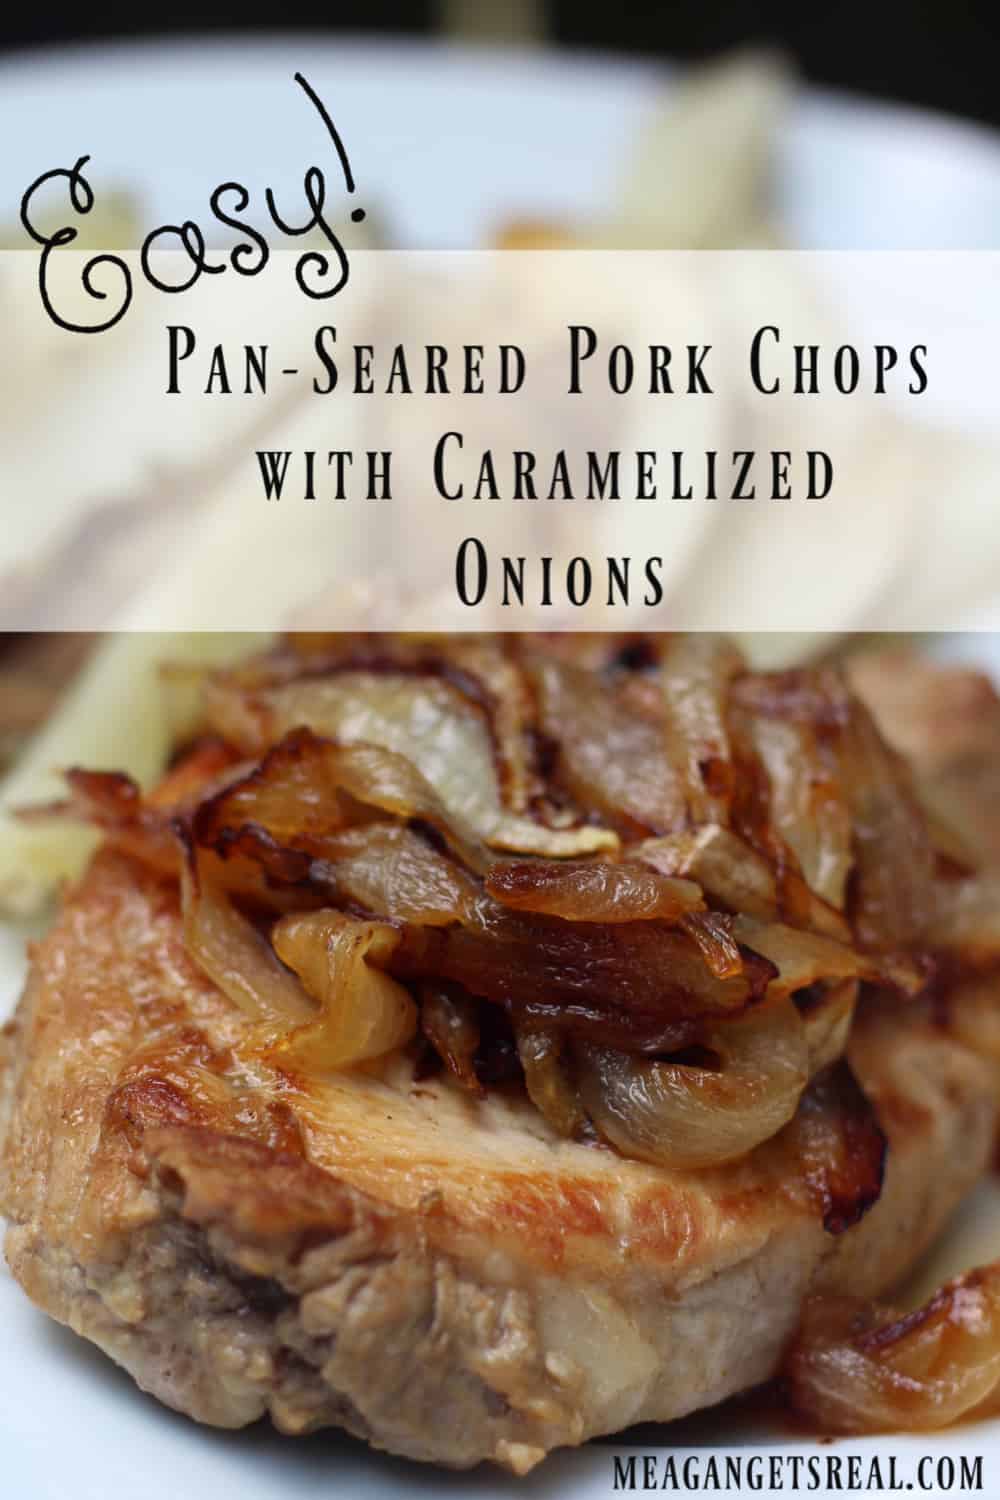 Pan-Seared Pork Chops with Caramelized Onions and a simple home fries recipe. This simple recipe is quick and easy to make! Includes step by step tips to make sure everything gets to the table hot at the same time! 